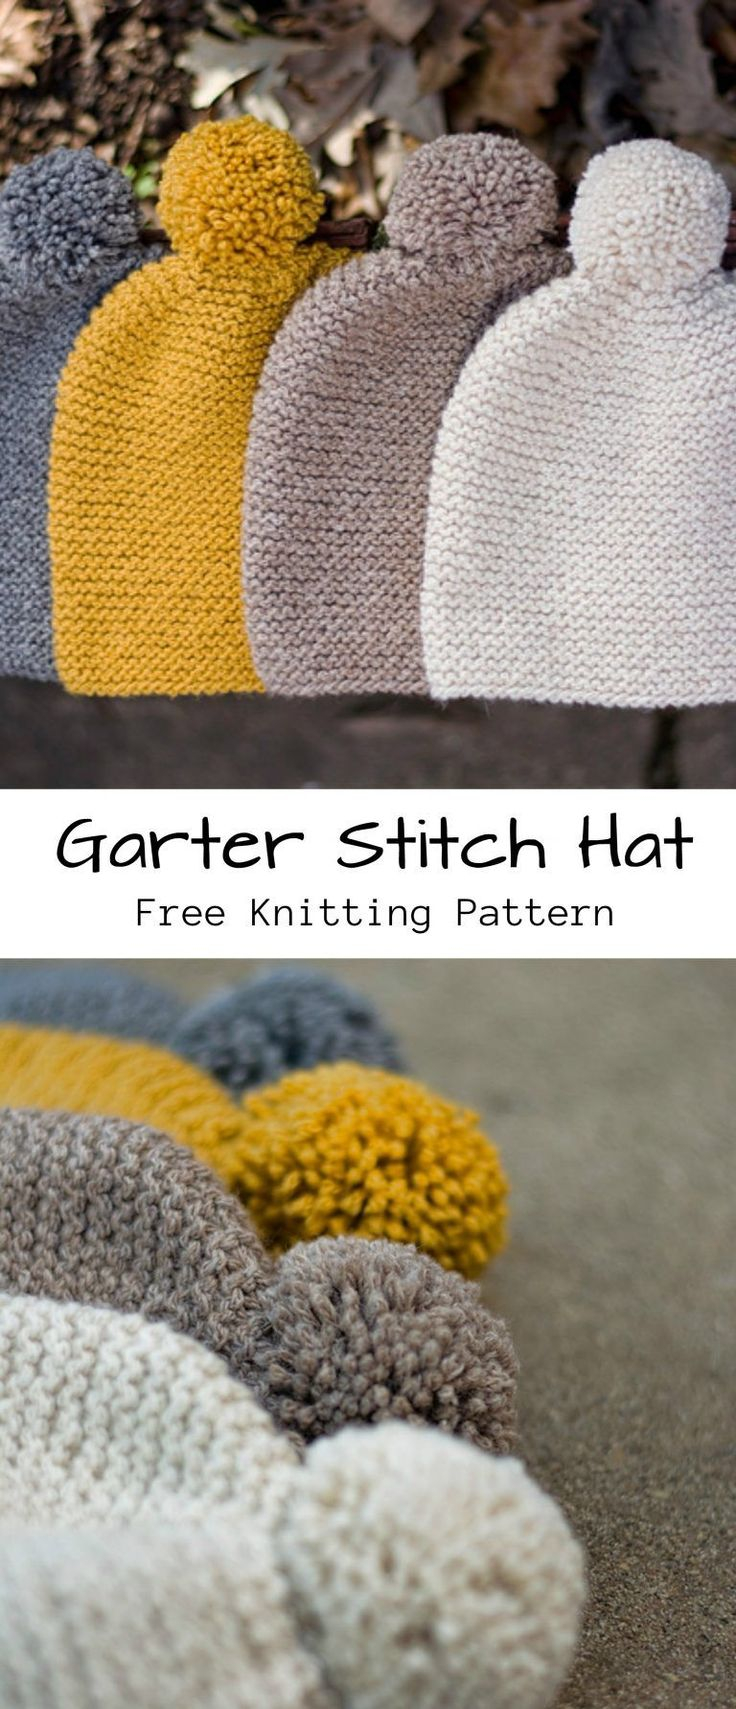 Free Knitting Patterns For Babies Hats Ba Knitting Patterns Gloves Garter Stitch Hat Free Knitting